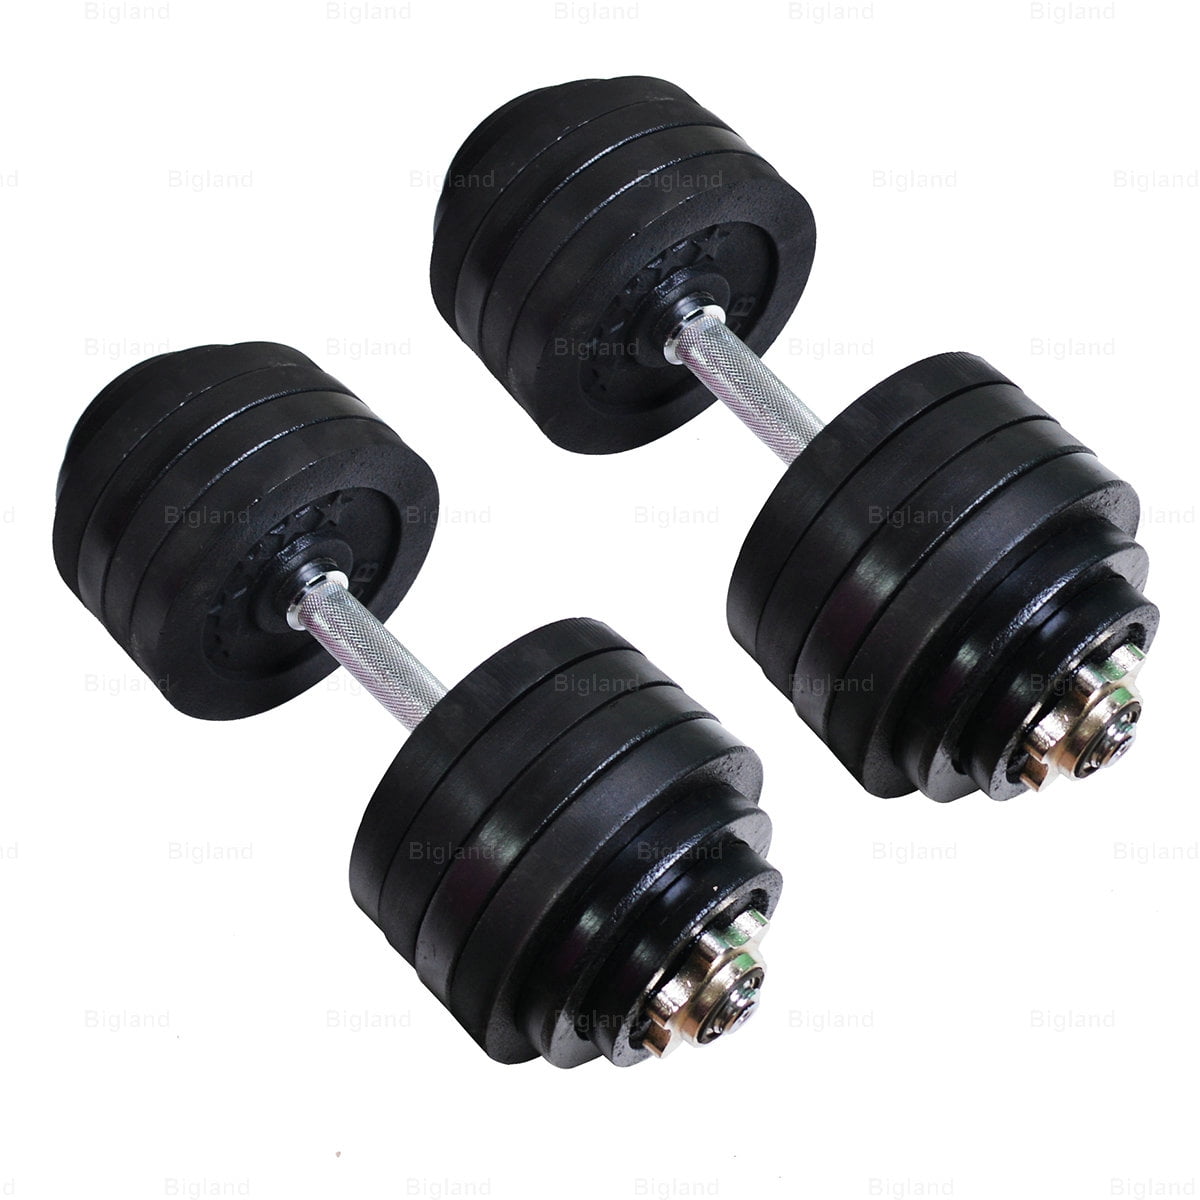 Details about   Totall 66 LB Weight Dumbbell Cap Gym Barbell Plates Body Workout Adjustable Set 